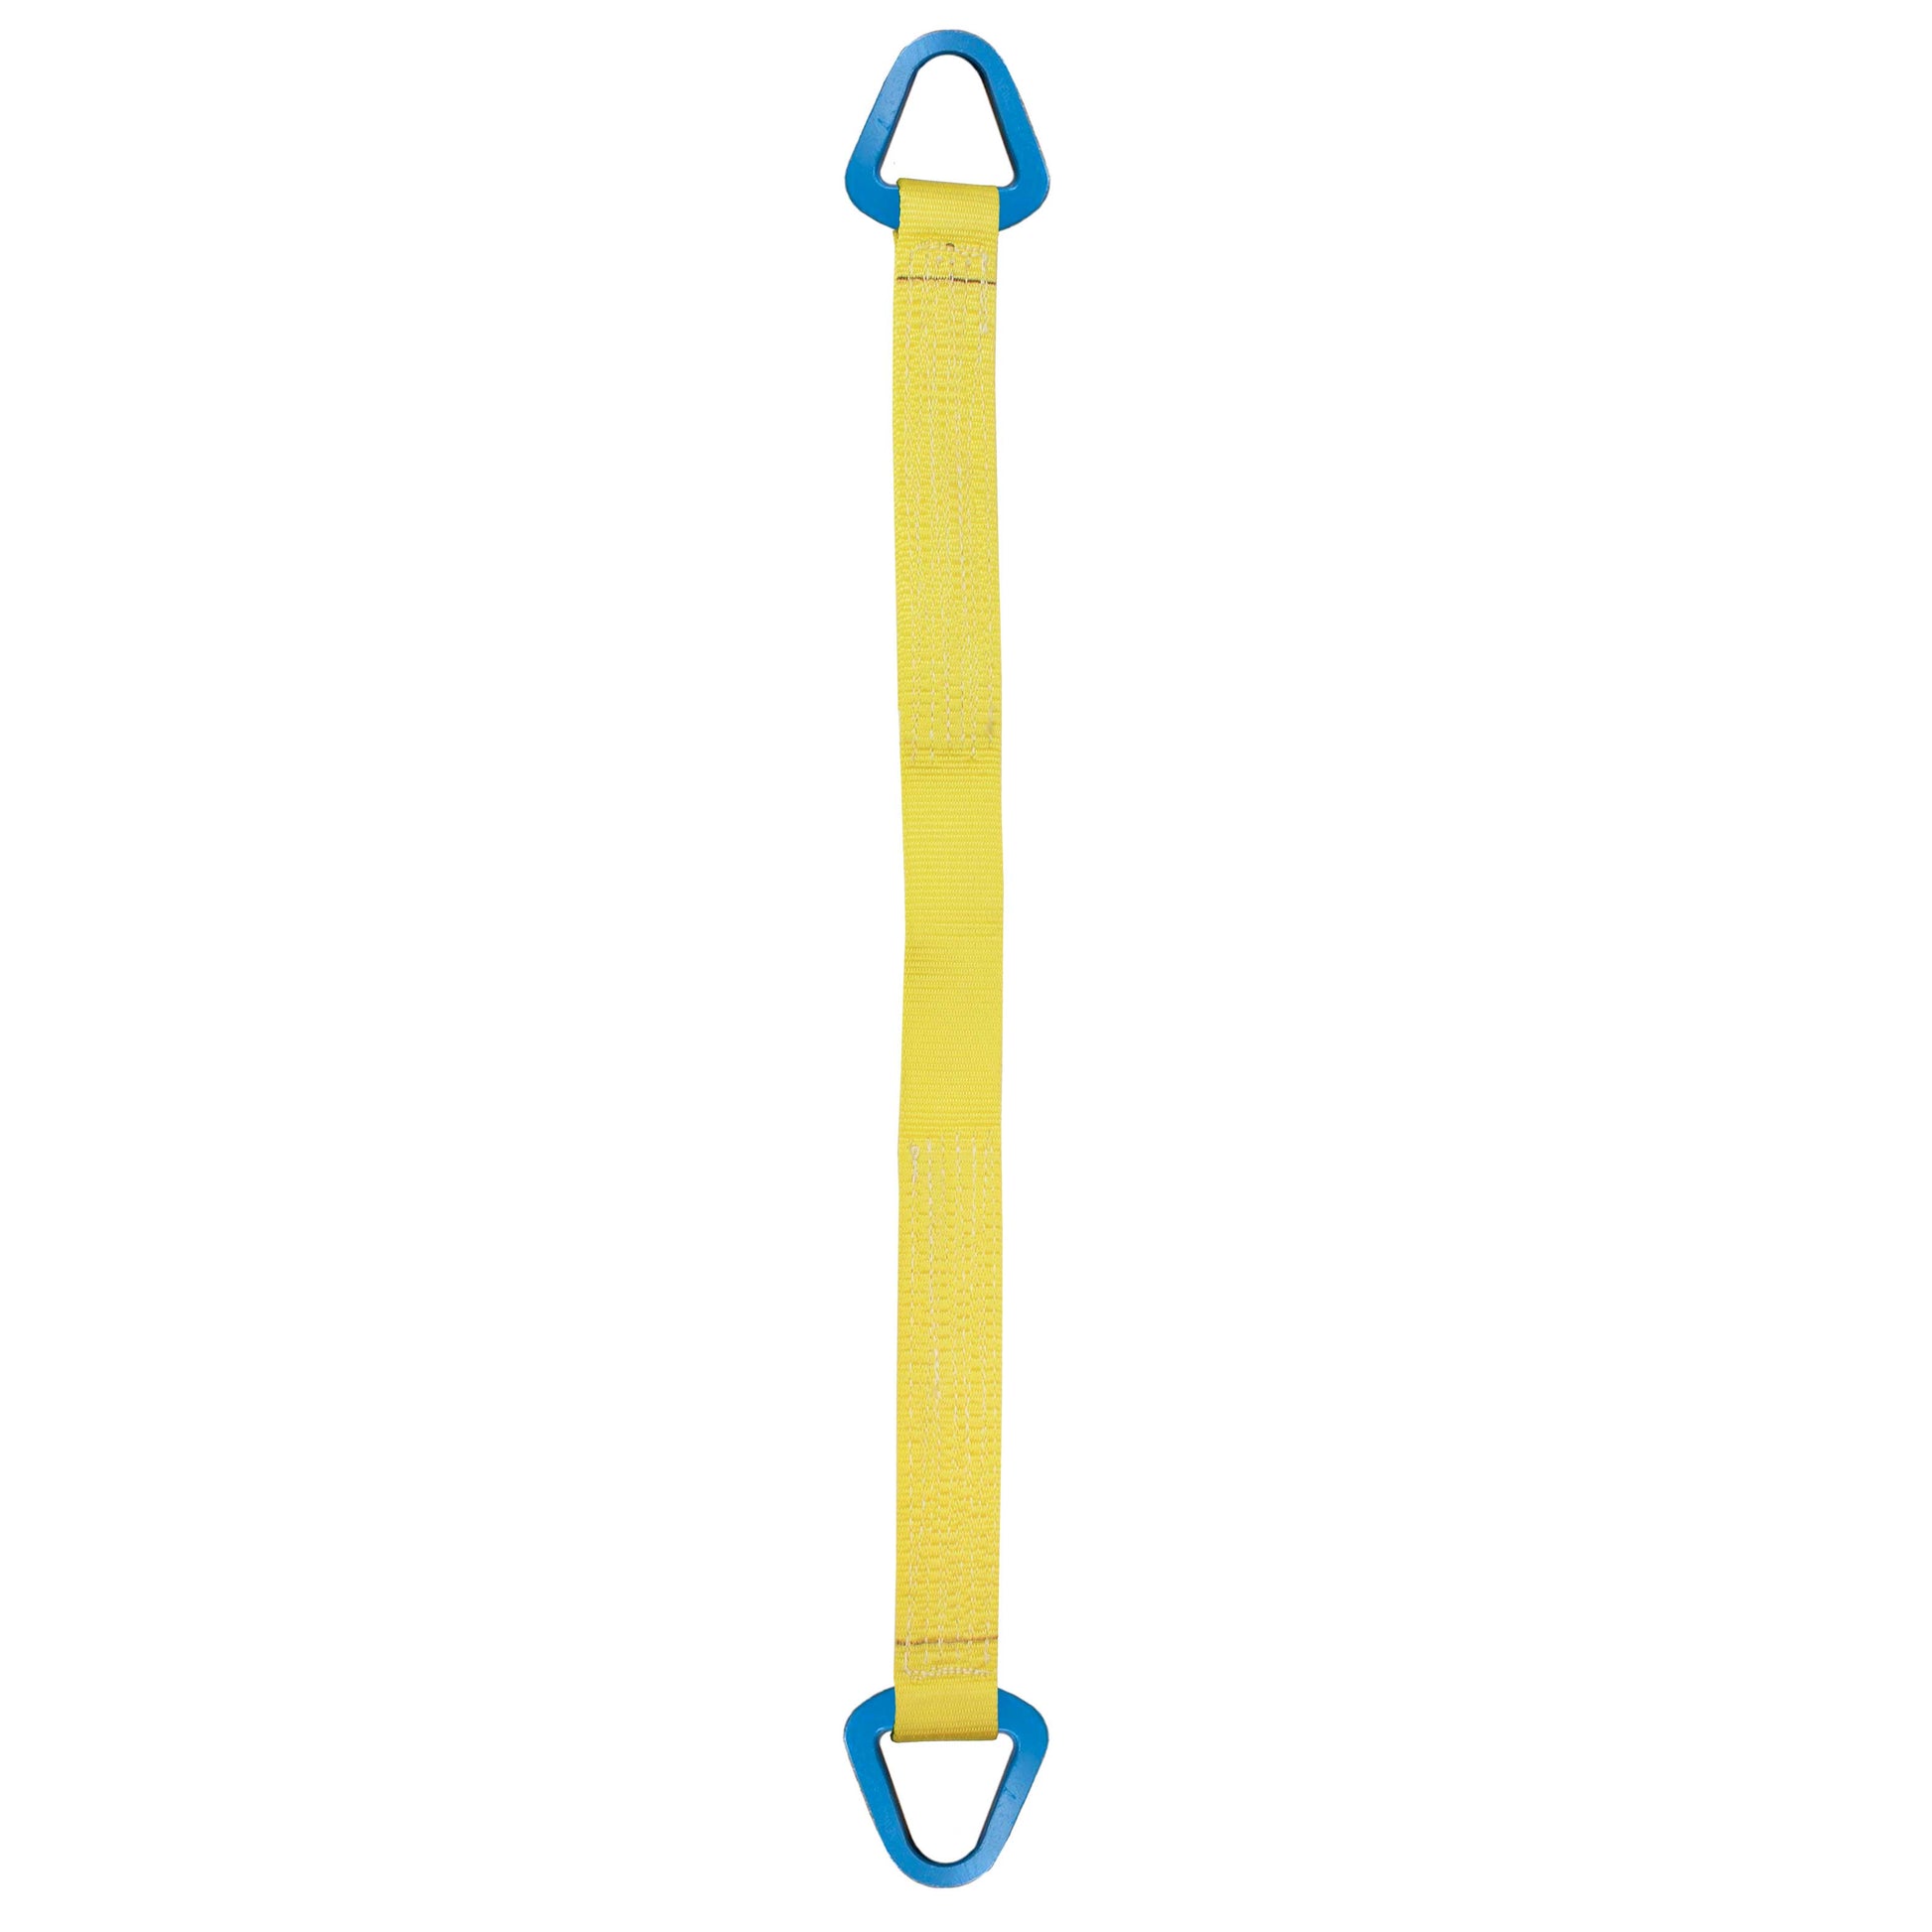 Nylon Lifting Sling Triangle 2 inch x 4 foot 2ply image 1 of 2